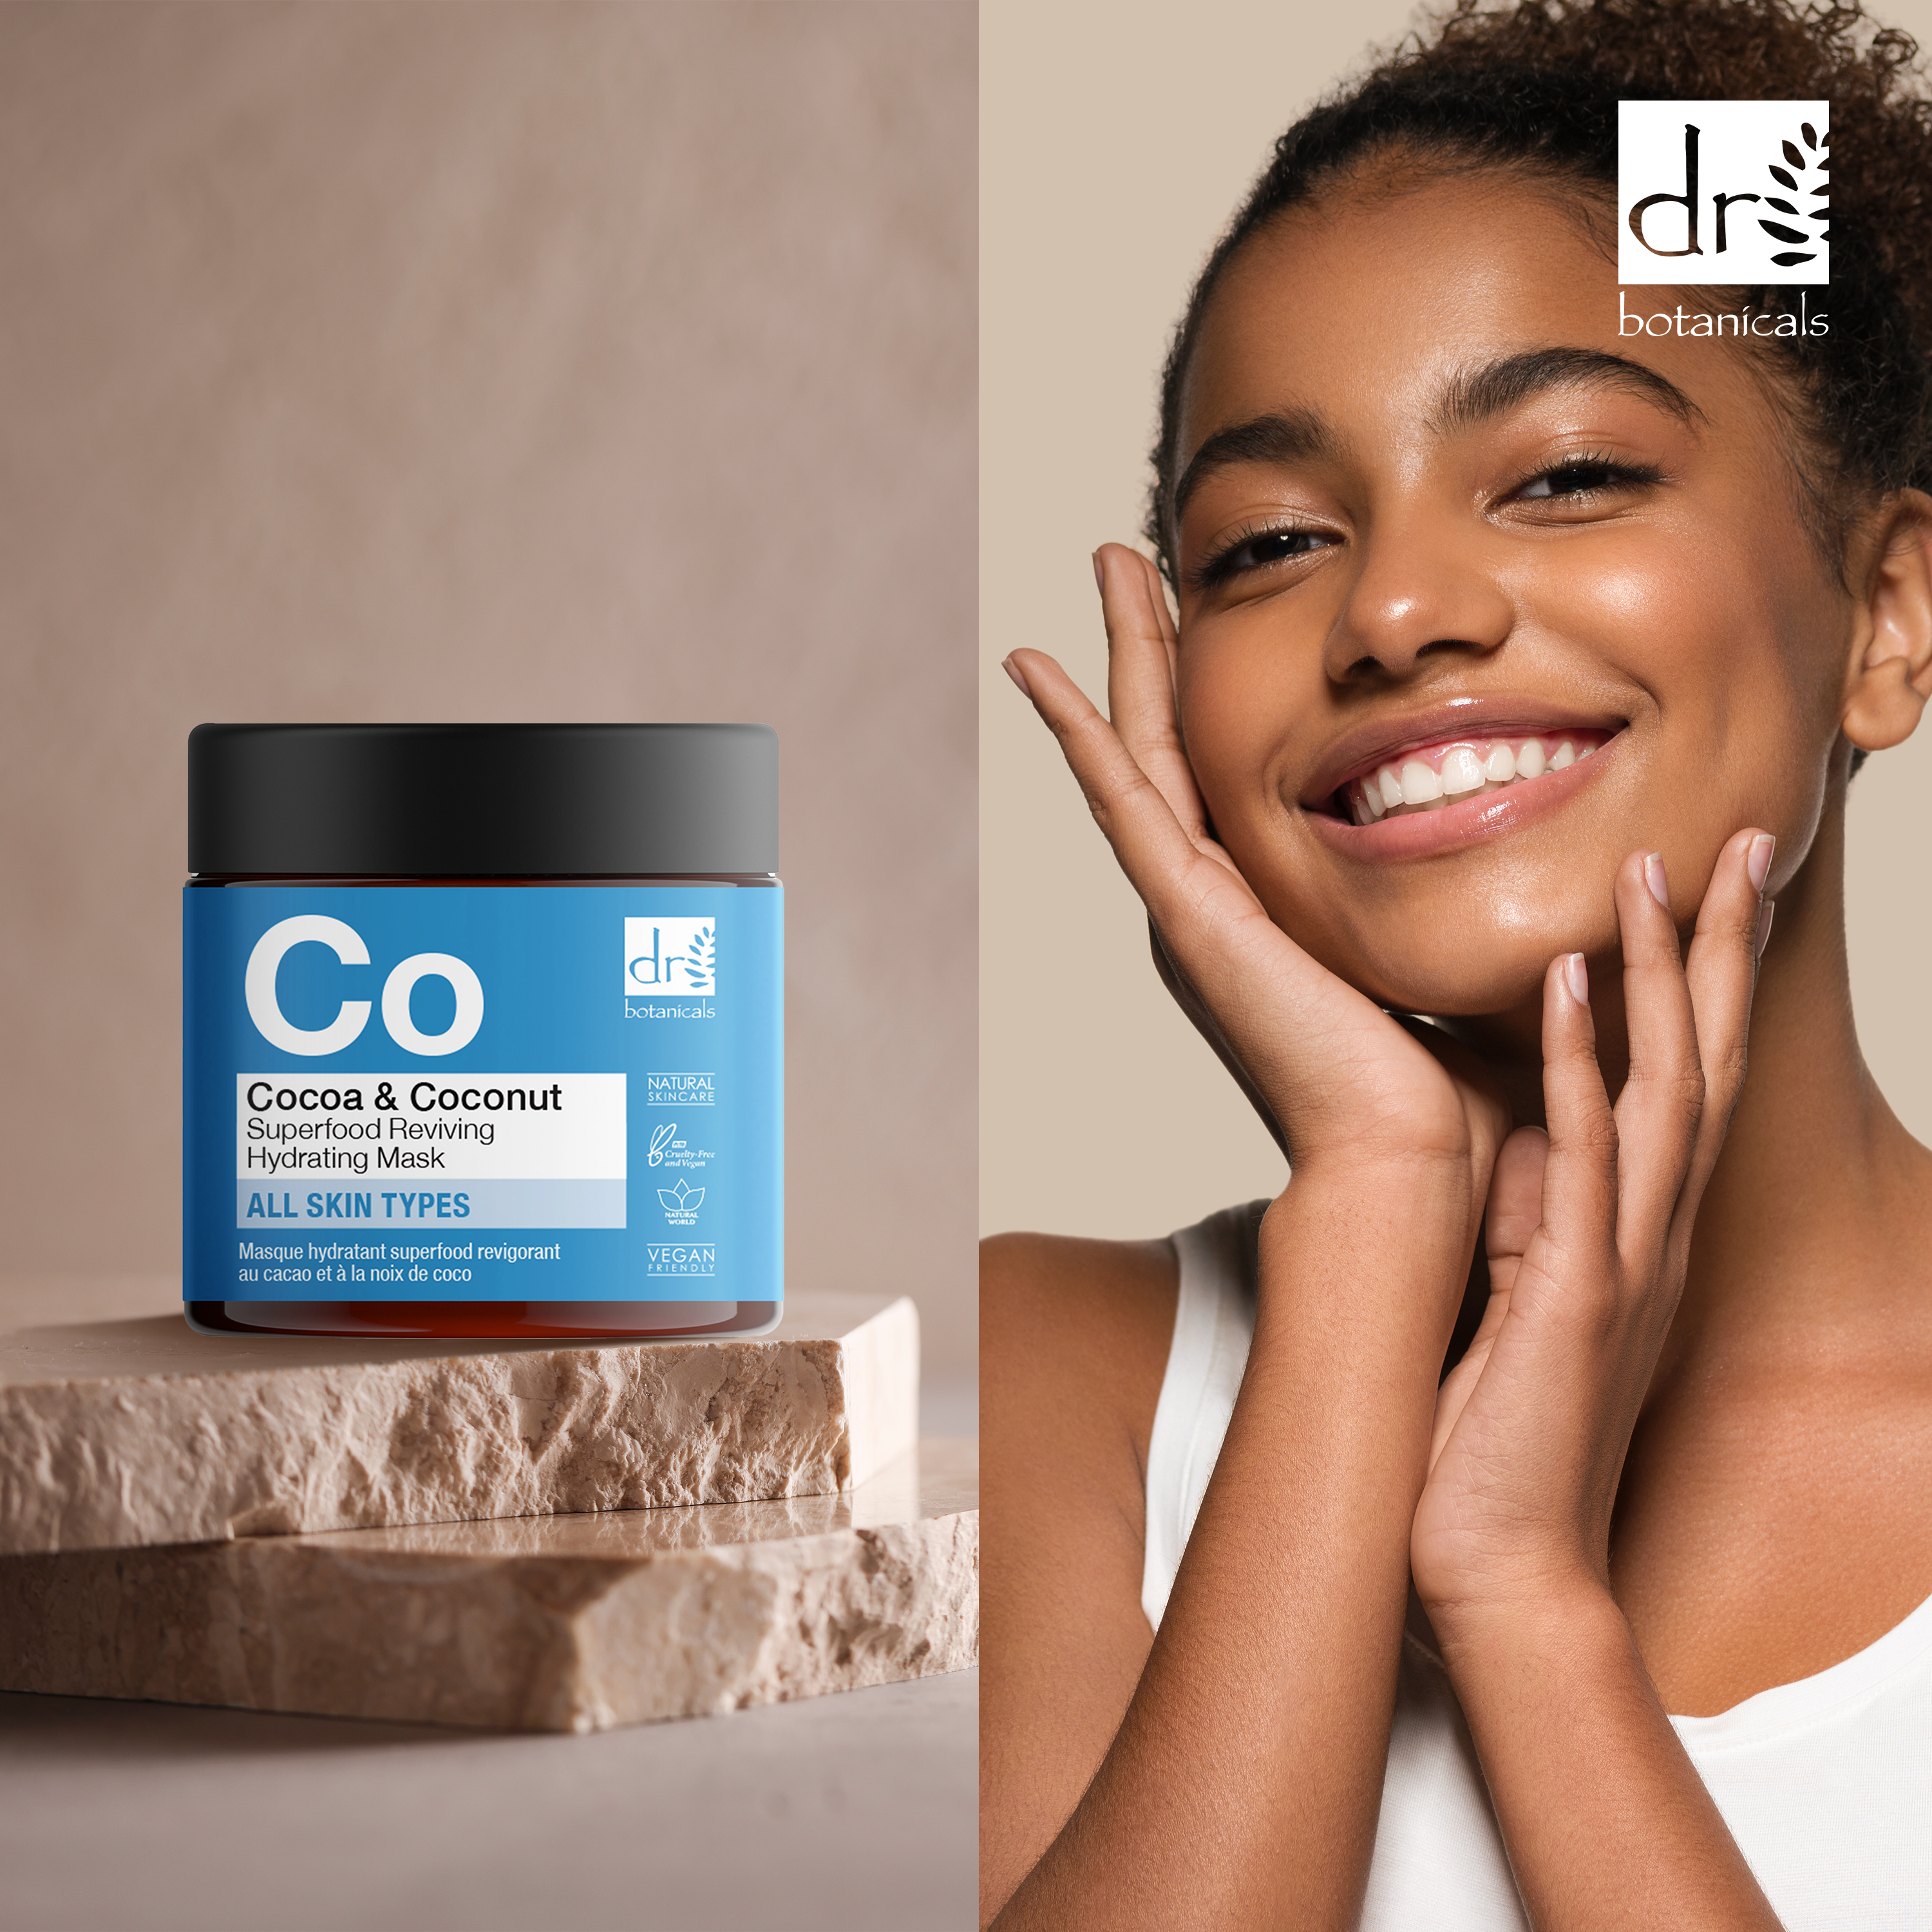 Cocoa & Coconut Superfood Reviving Hydrating Mask 60ml